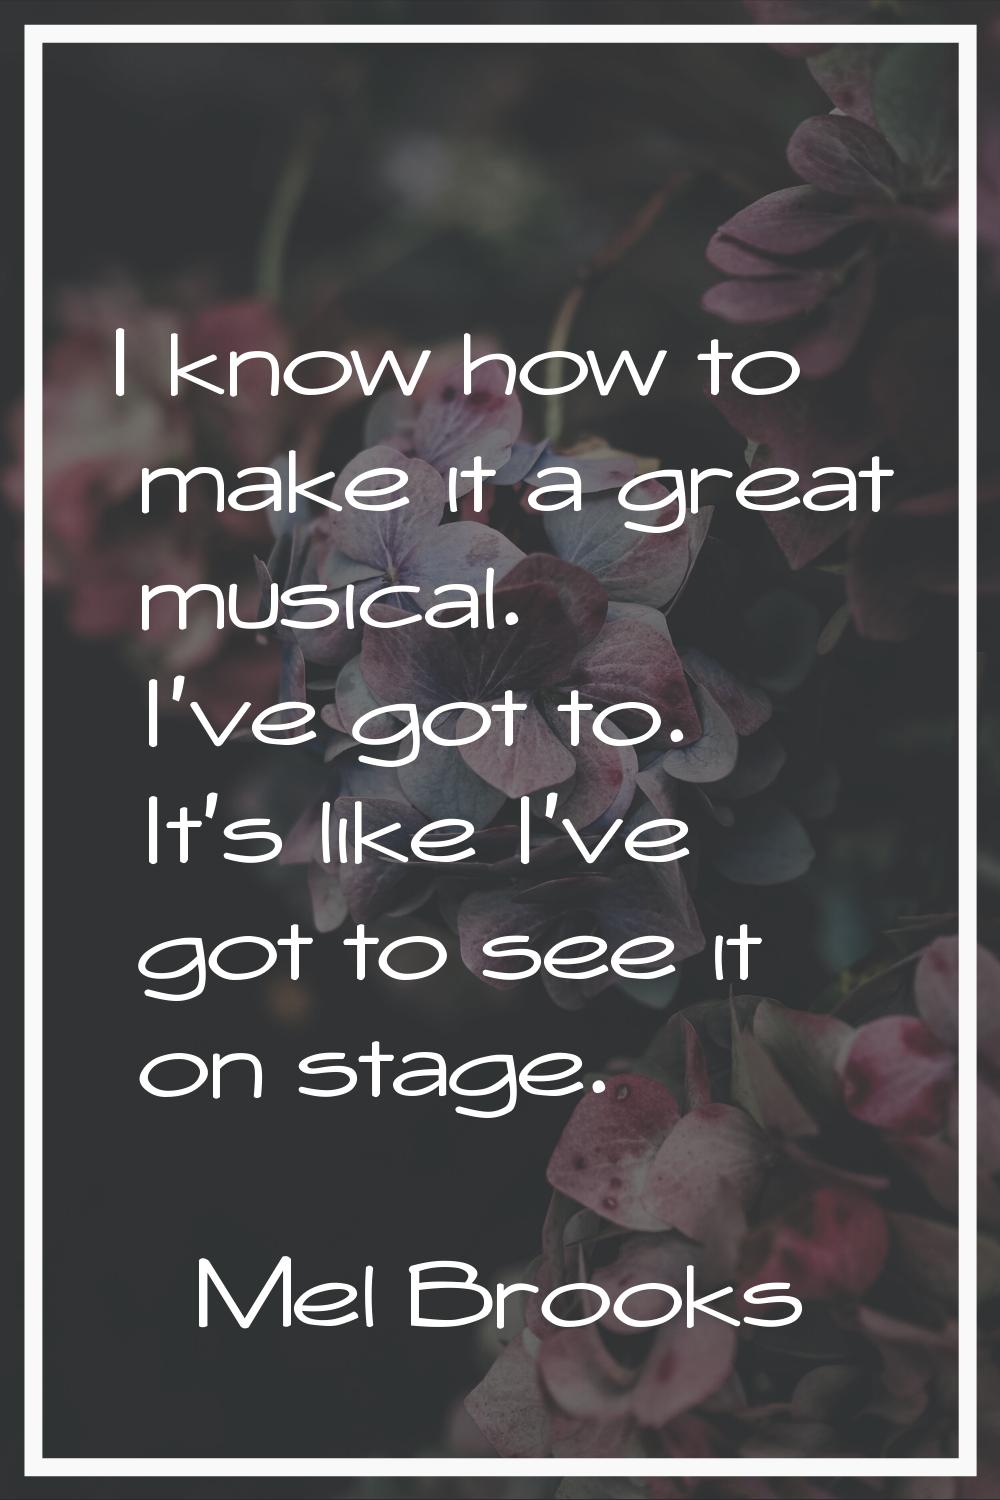 I know how to make it a great musical. I've got to. It's like I've got to see it on stage.